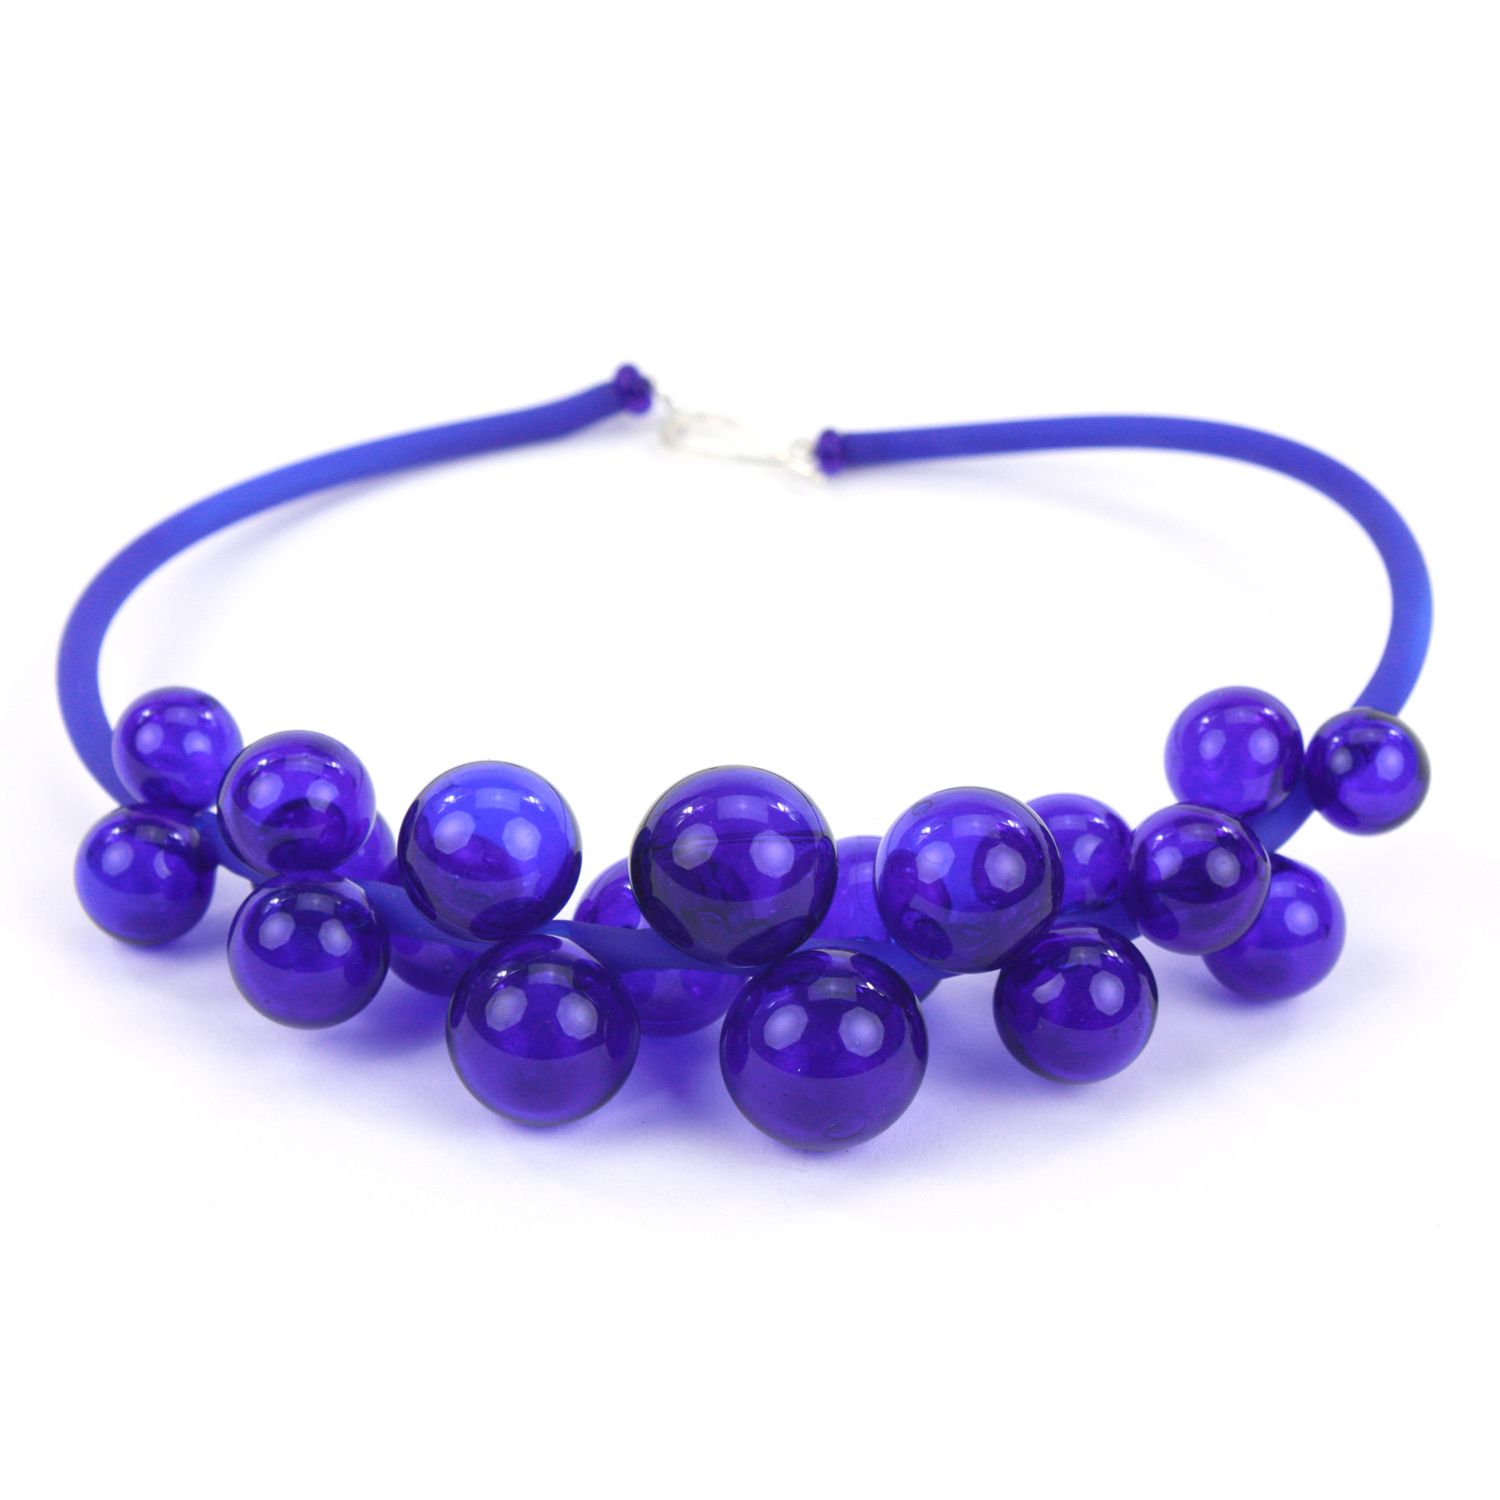 Alicia Niles: Chroma Bolla Necklace – Cobalt Product Image 2 of 3